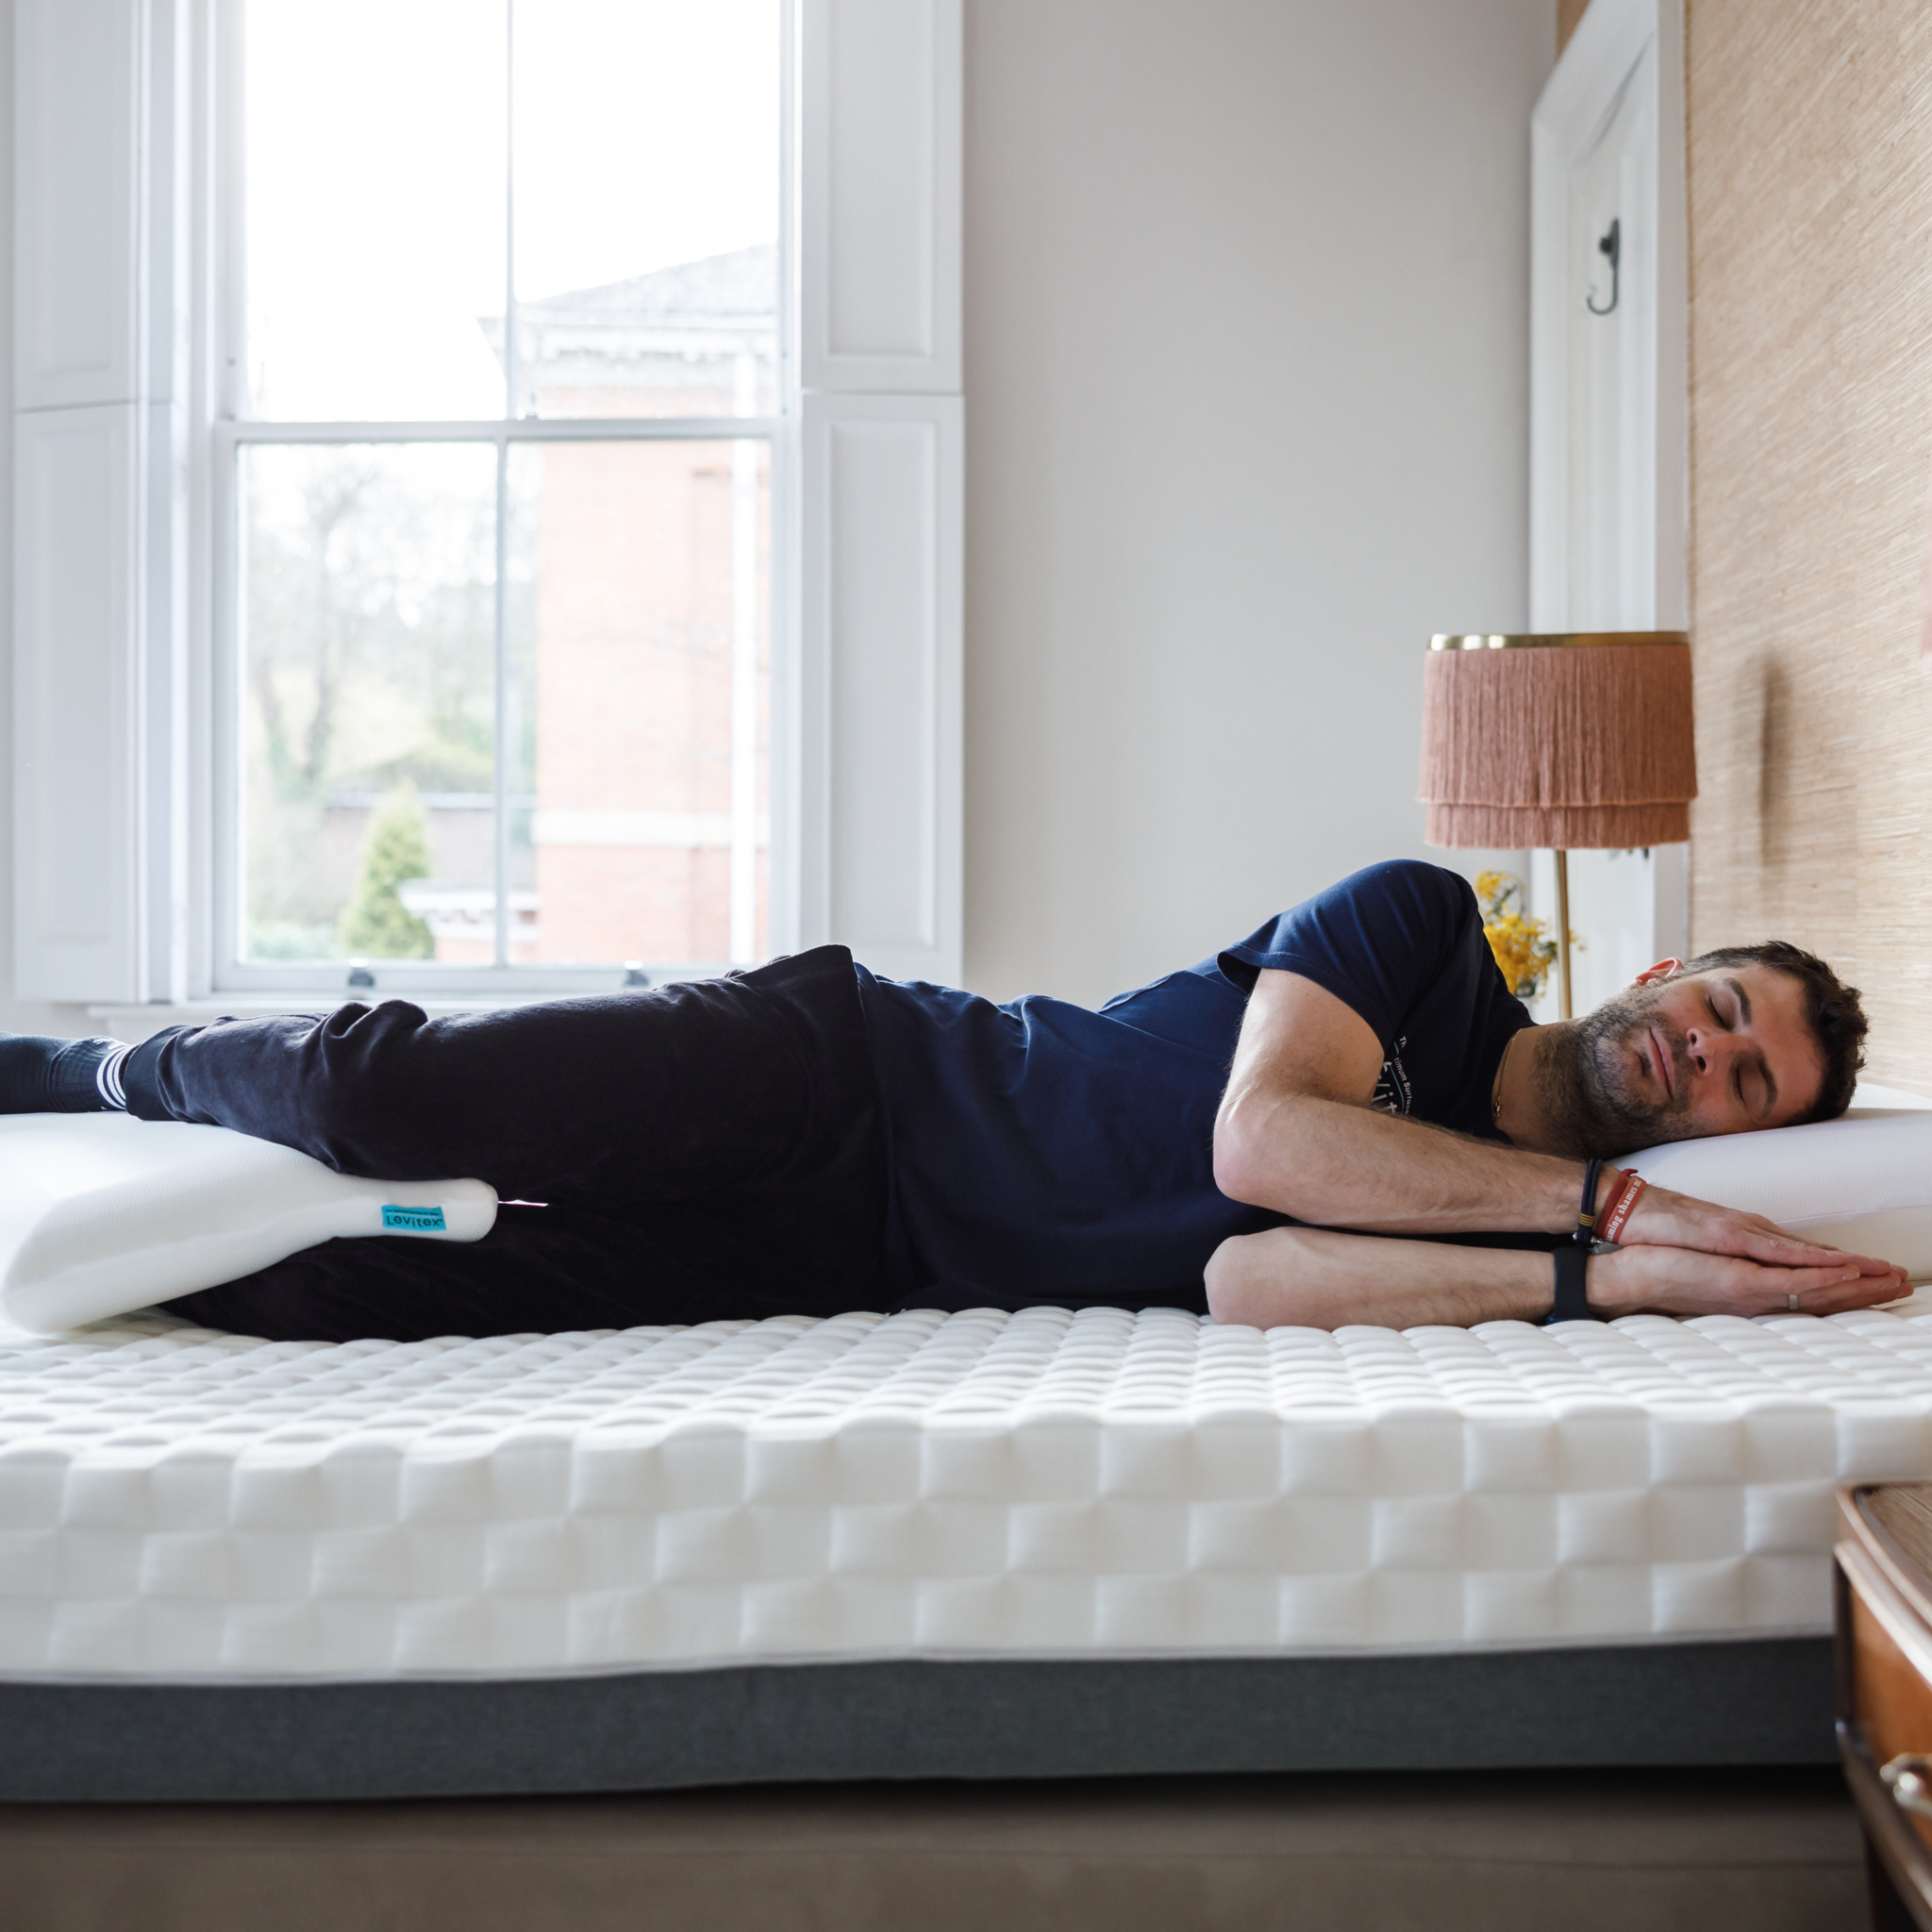 man lying on the bed in the dreamer position with pillow in between knees and ankles